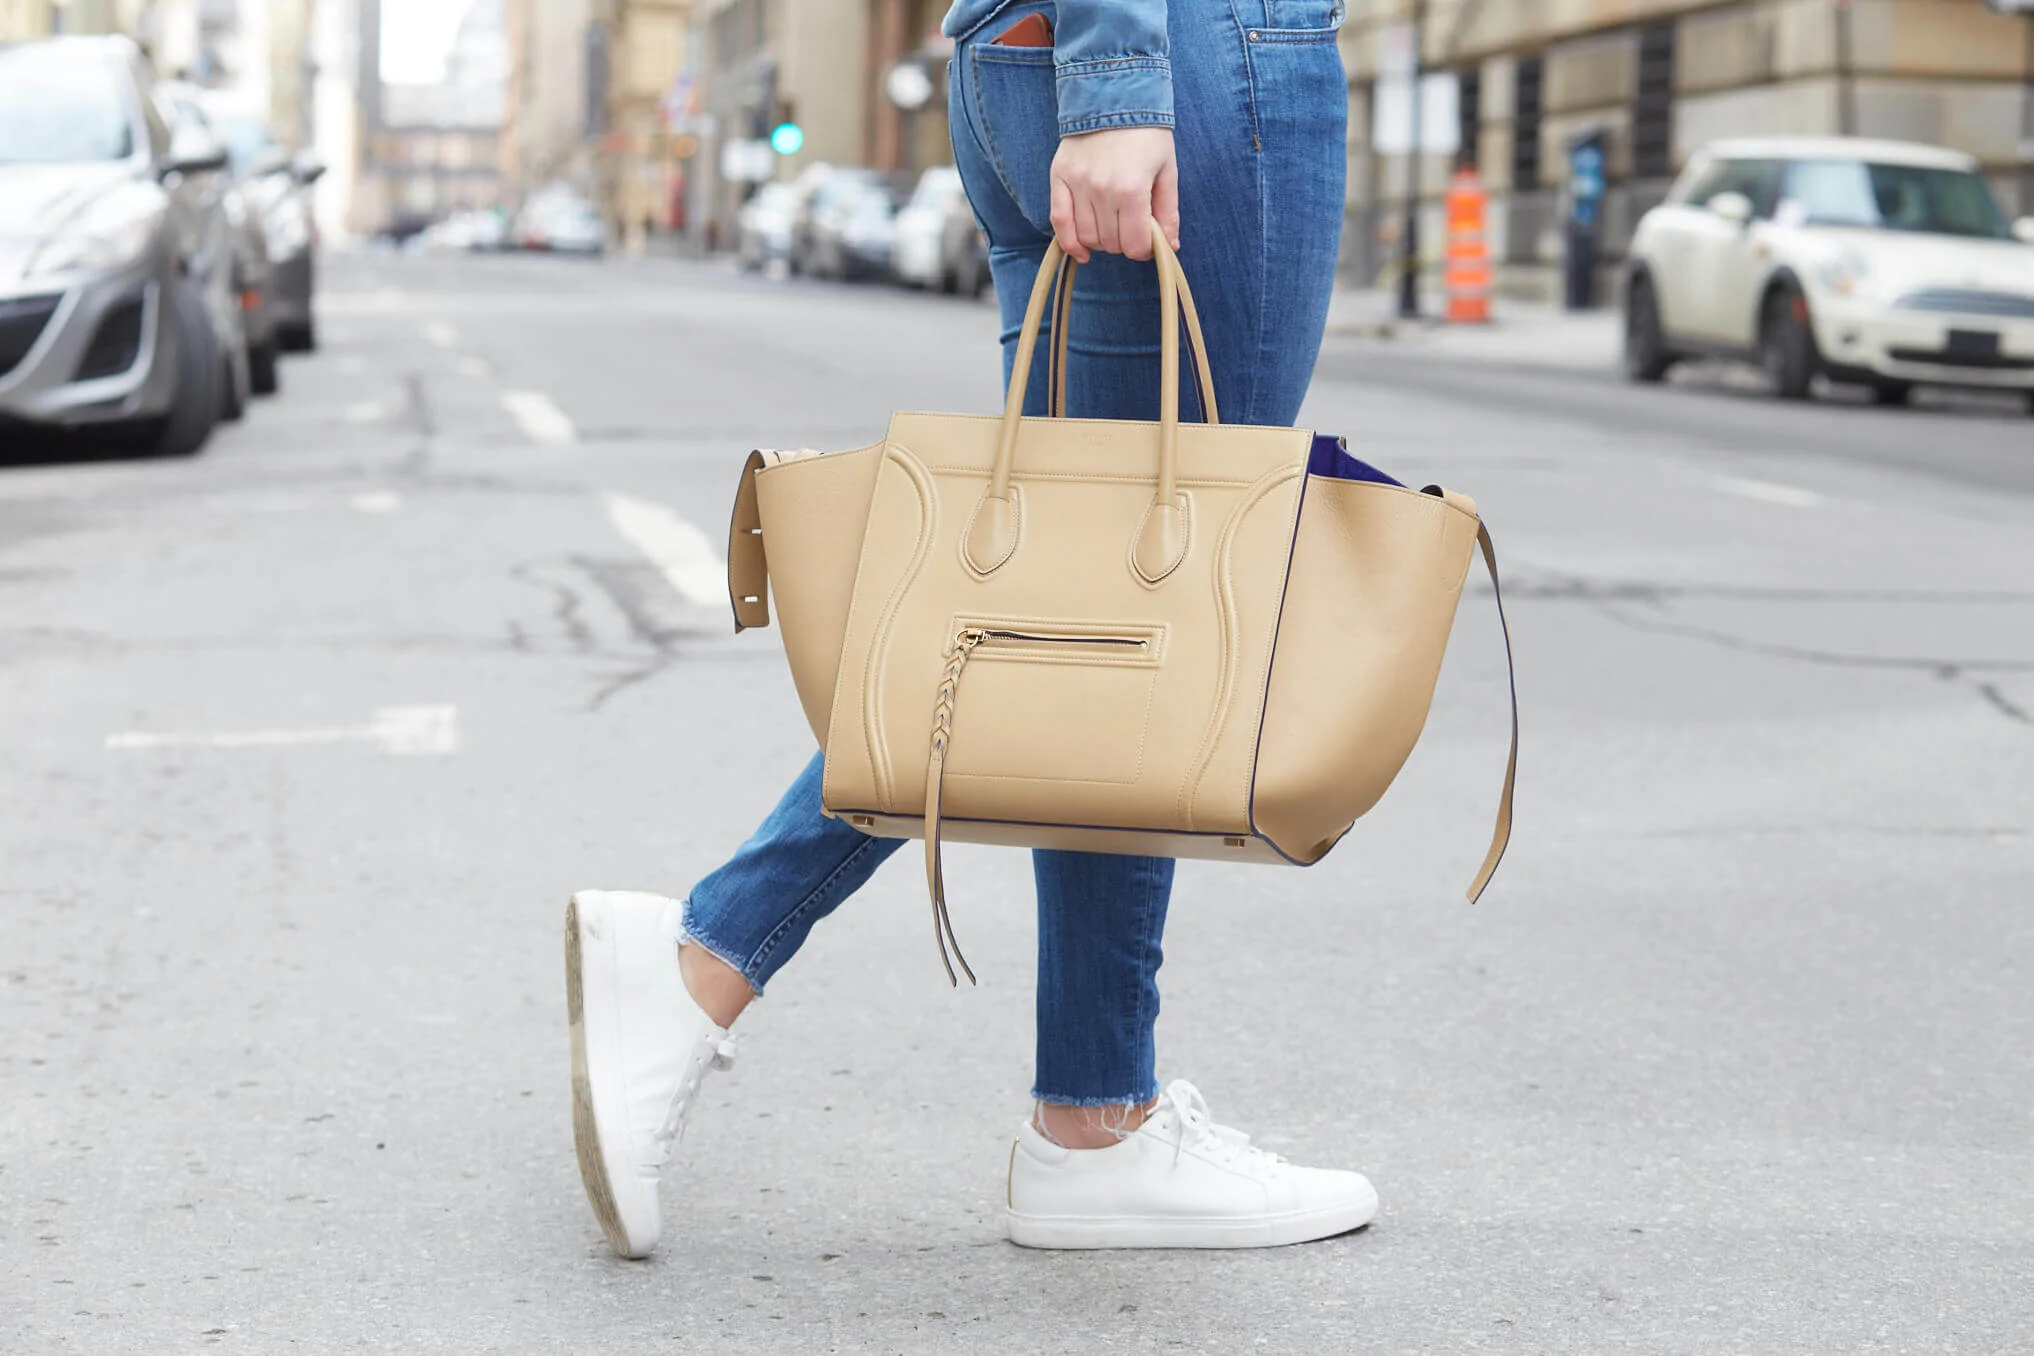 Purchasing a high-quality and luxurious leather handbag might seem like a significant investment, but it will undoubtedly be worth the money.